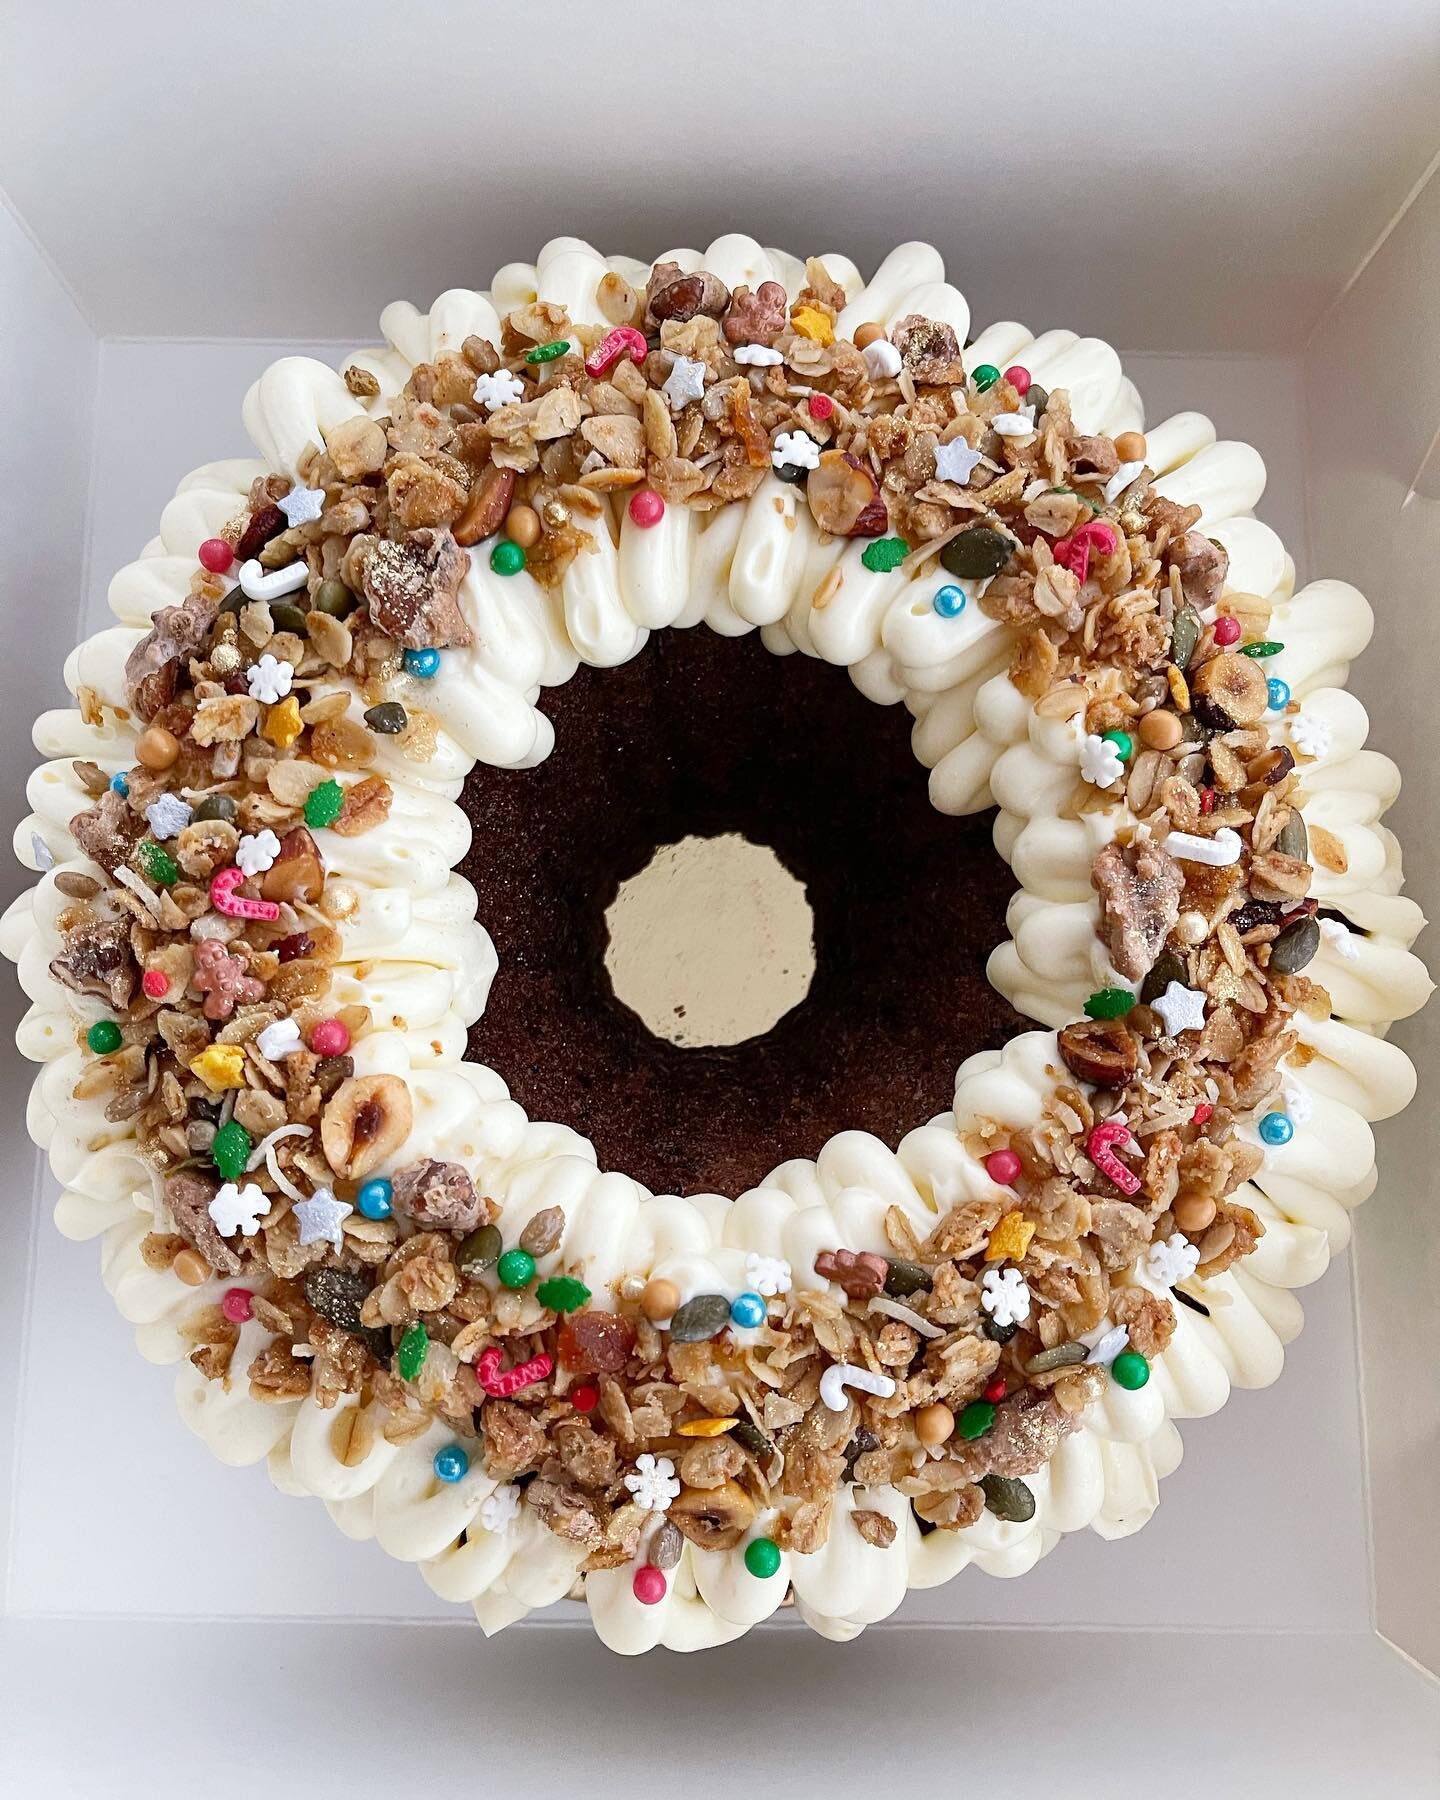 GINGERBREAD CARROT &amp; WALNUT BUNDT: our signature cake turned festive!

All orders for this year have now closed! Thank you so much to everyone who has placed an order with us.

#sydneydesserts #xmascake #carrotcake